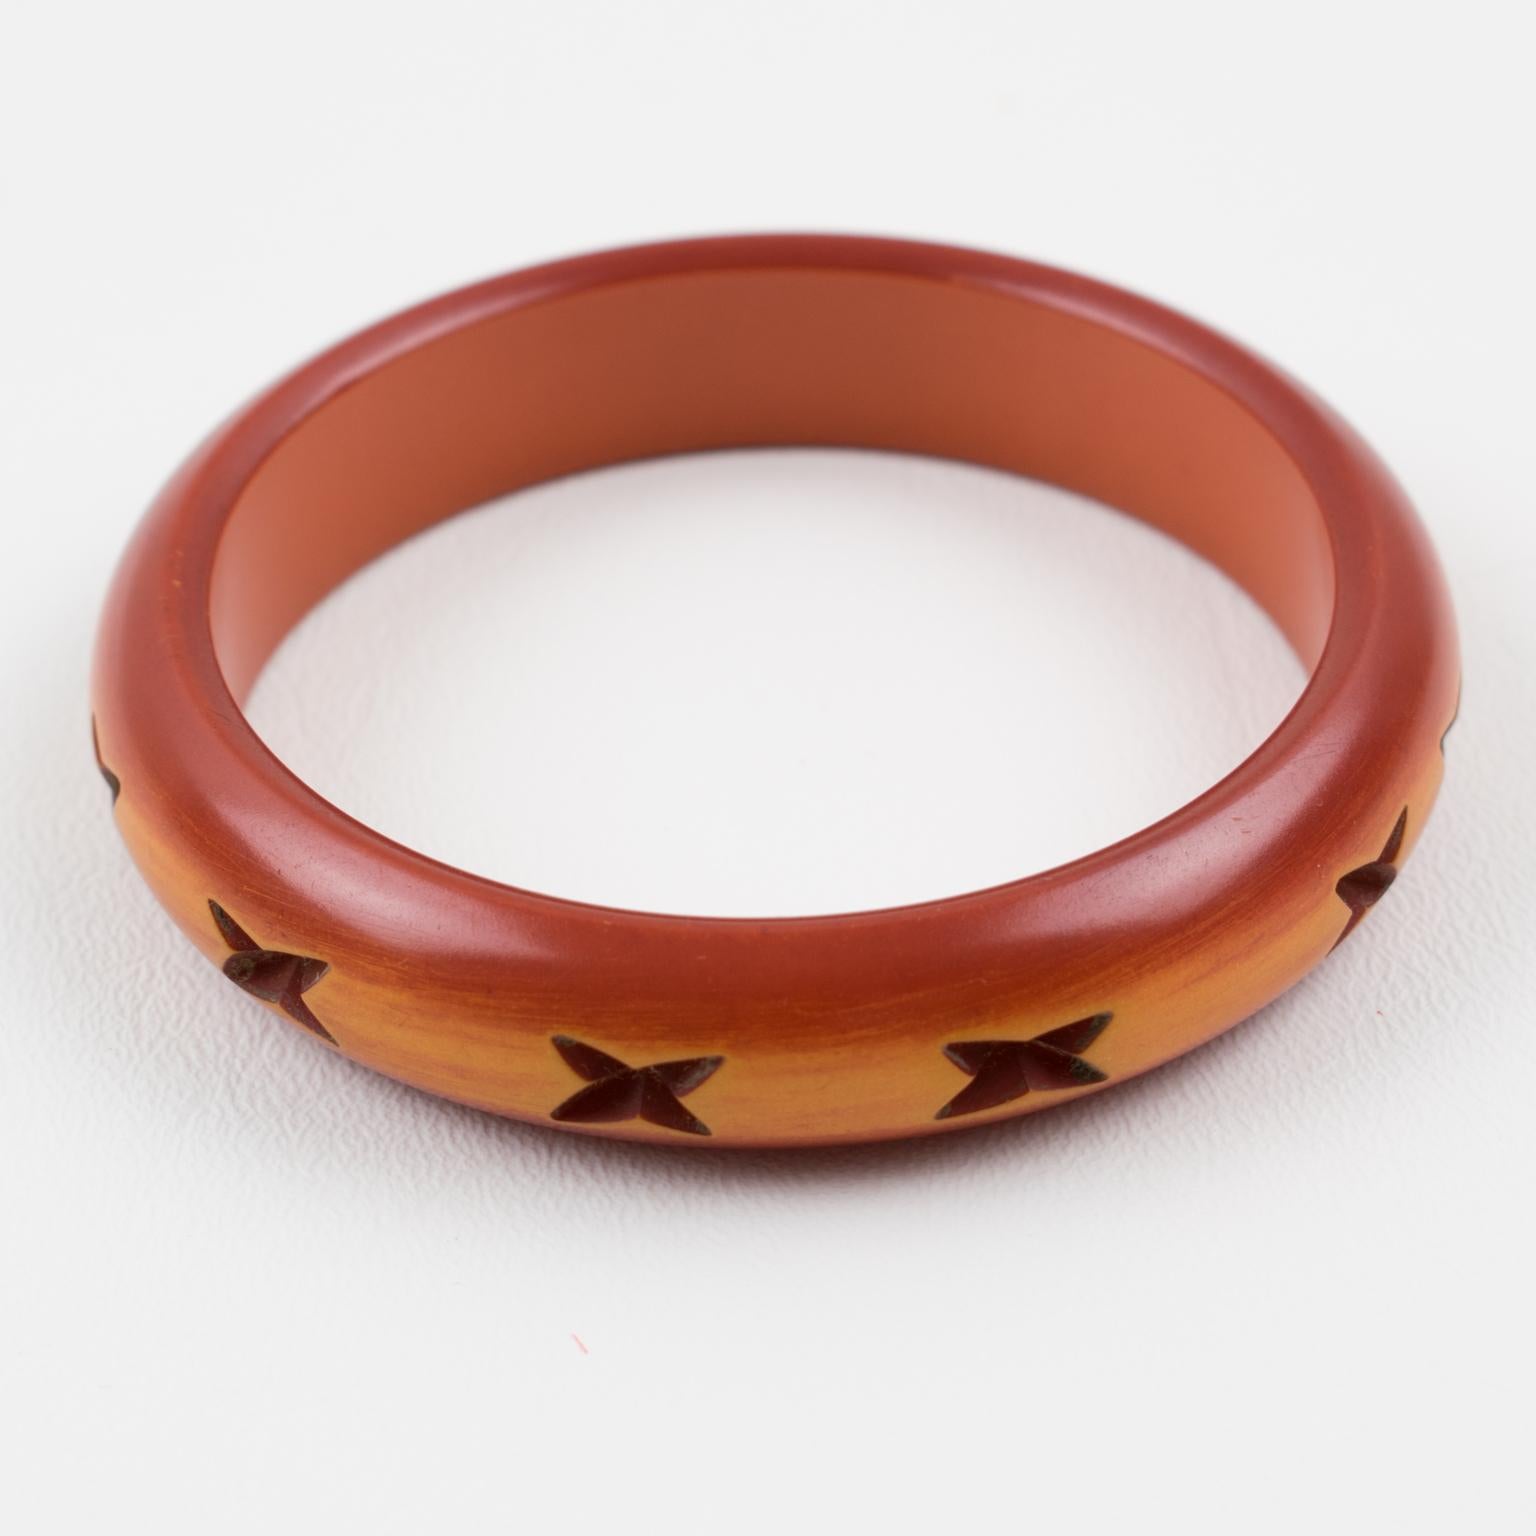 This stunning bi-color Bakelite carved bracelet bangle features a chunky domed shape with deep geometric carving all around, featuring an 